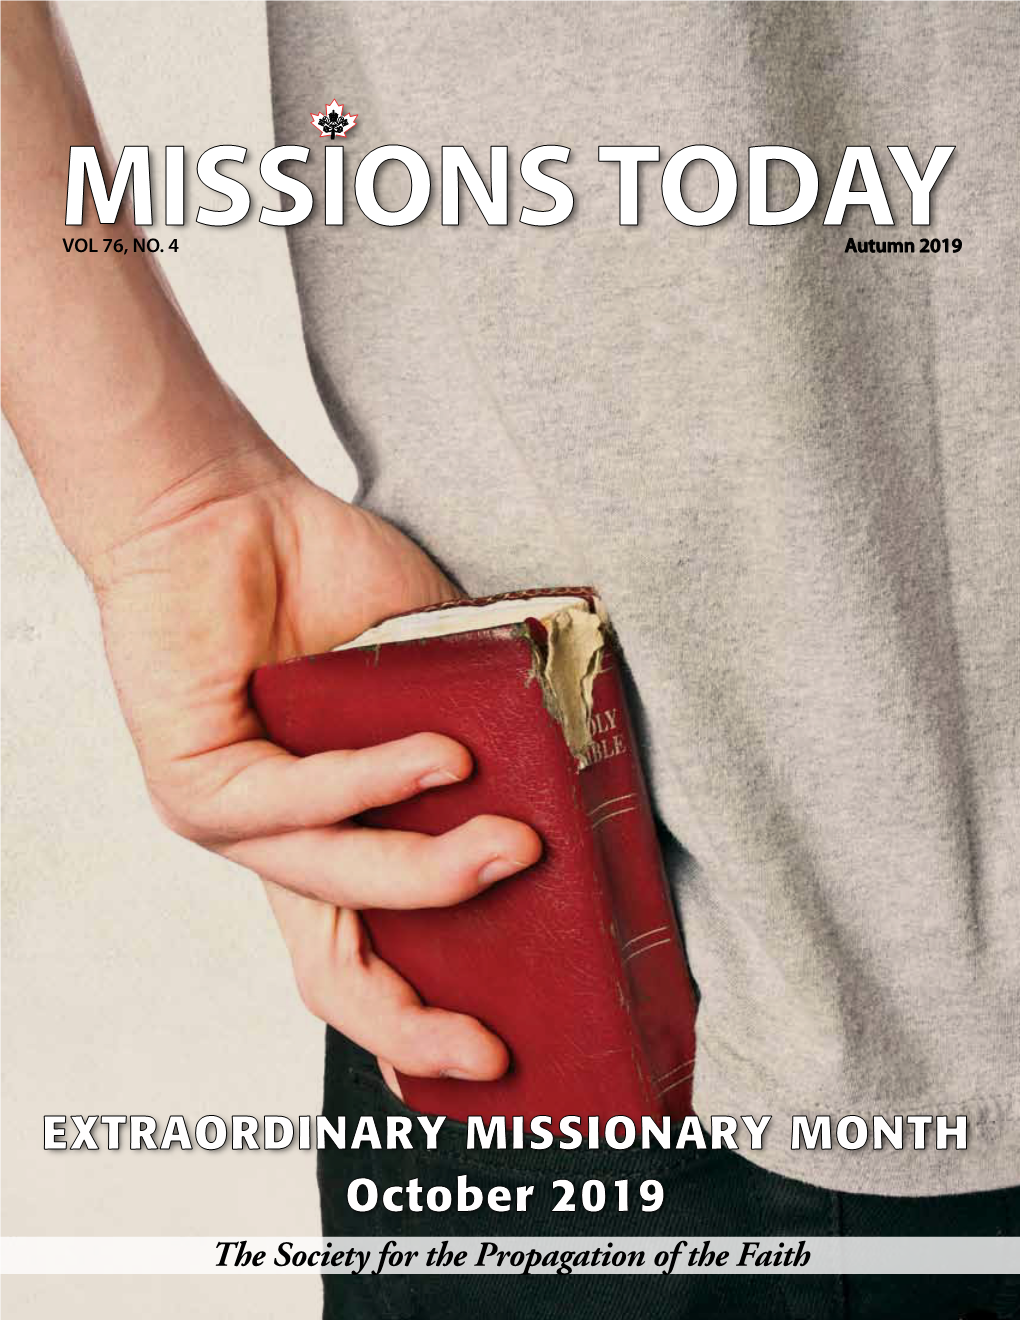 EXTRAORDINARY MISSIONARY MONTH October 2019